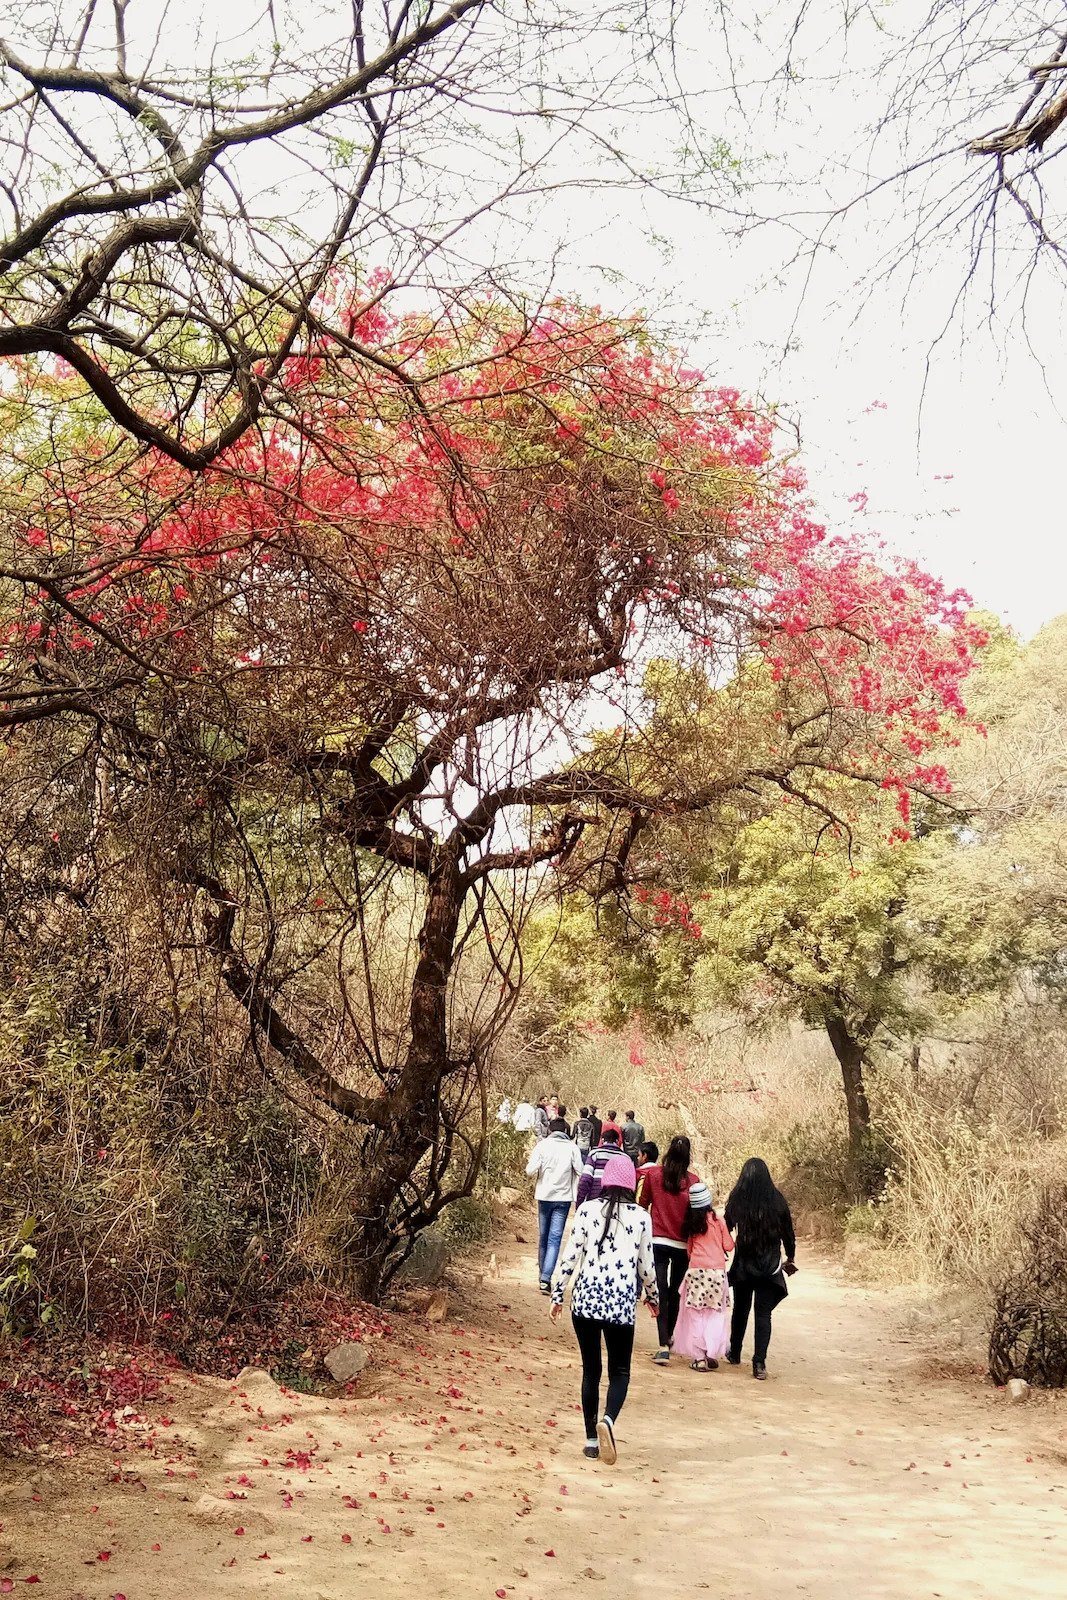 Guided Hike Through Delhi’s Forest